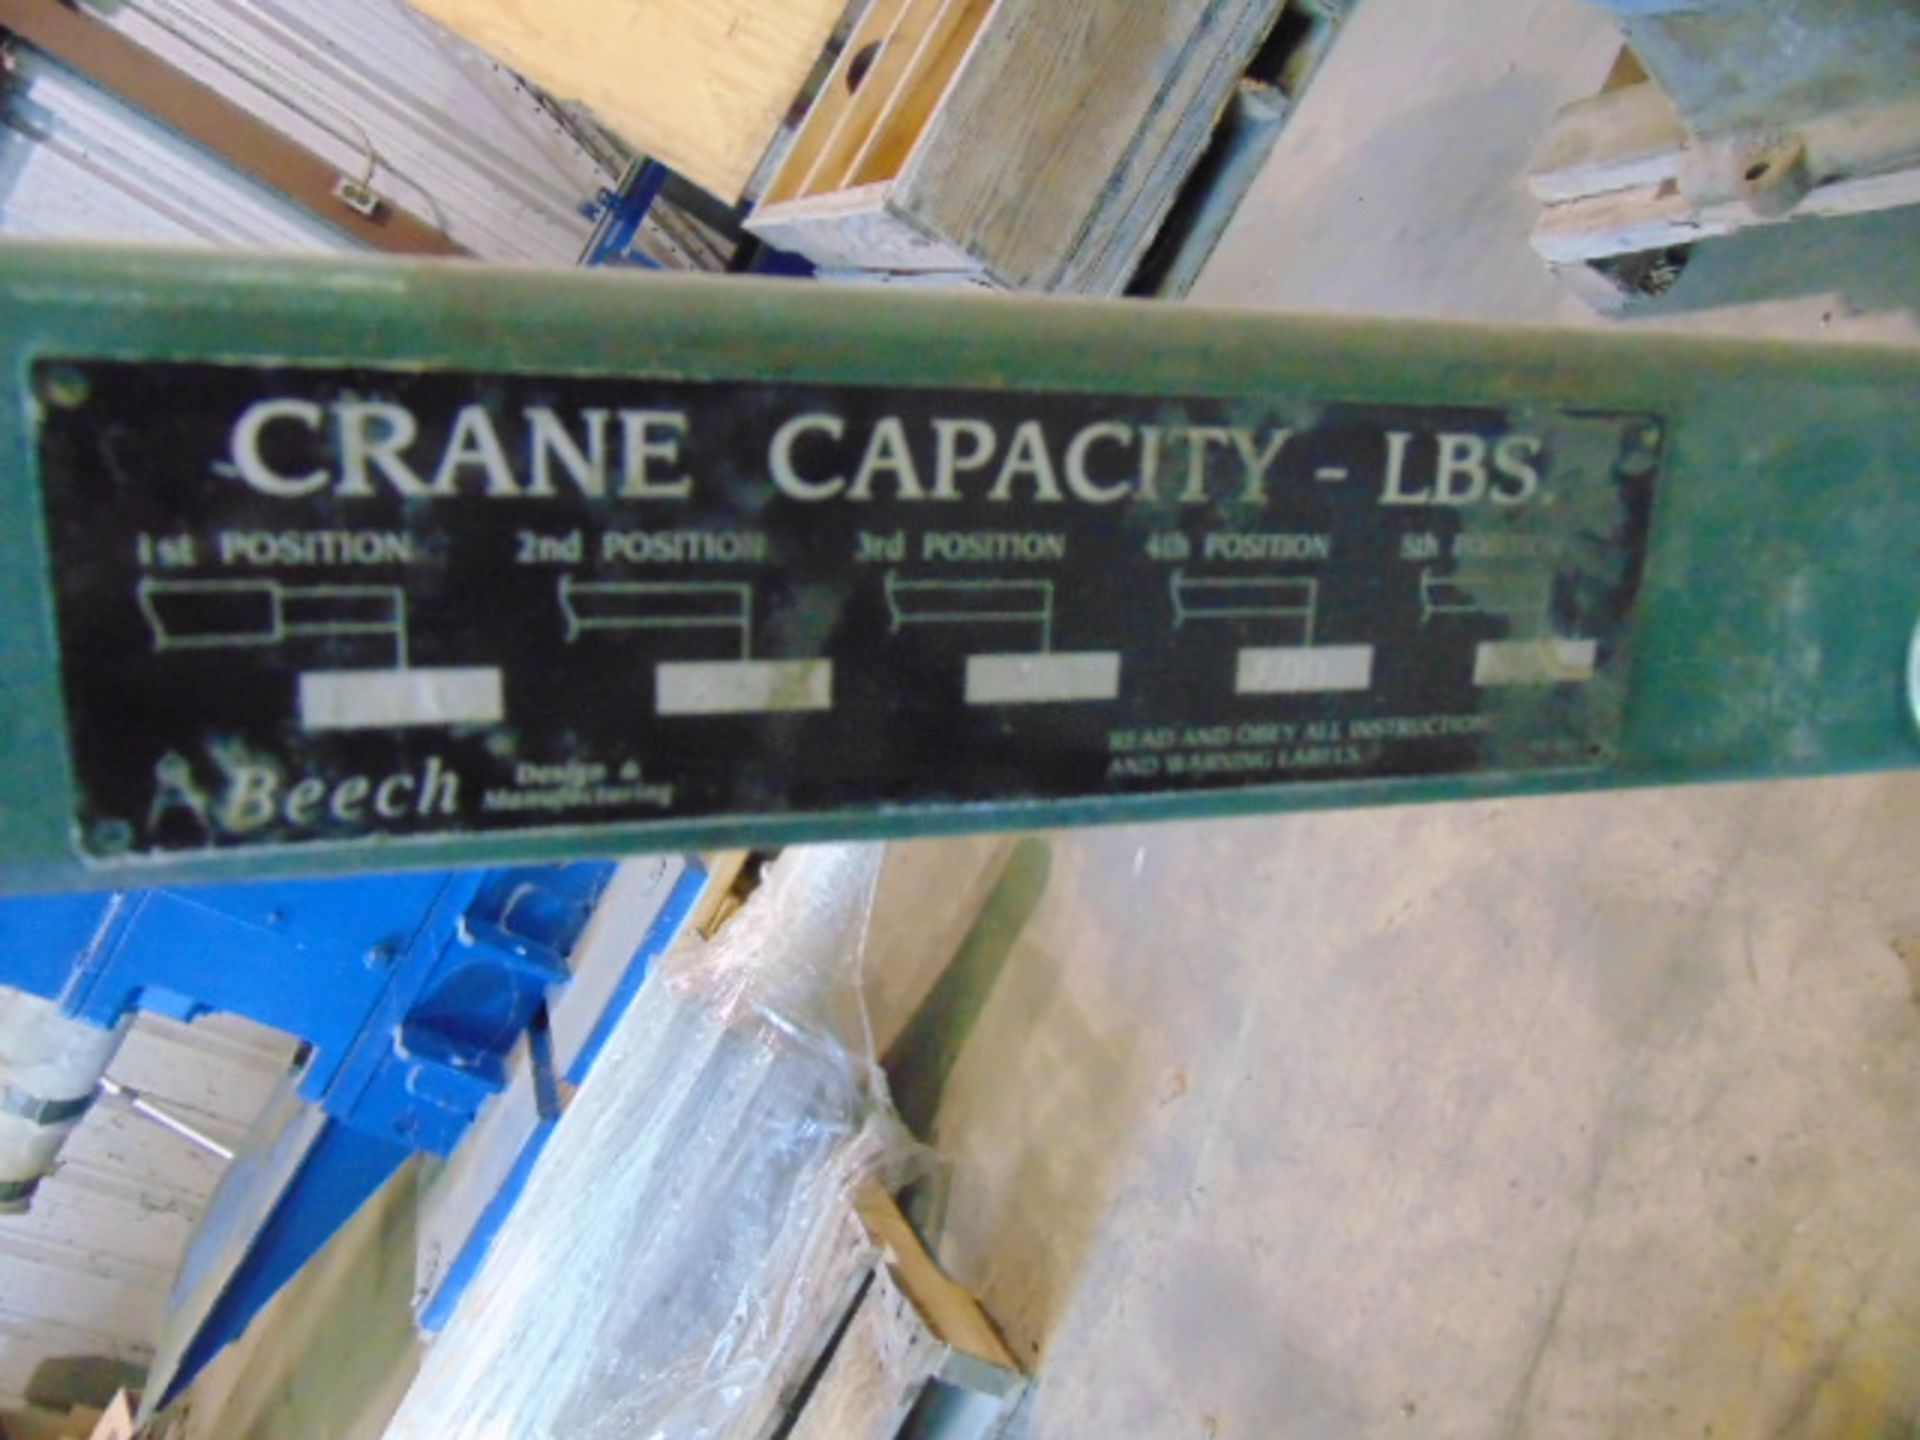 PORTABLE CRANE SYSTEM, BEECH MDL. B-1000 CW, 1,000 lb. cap., S/N 033971 (Located in bldg. 8) - Image 2 of 3